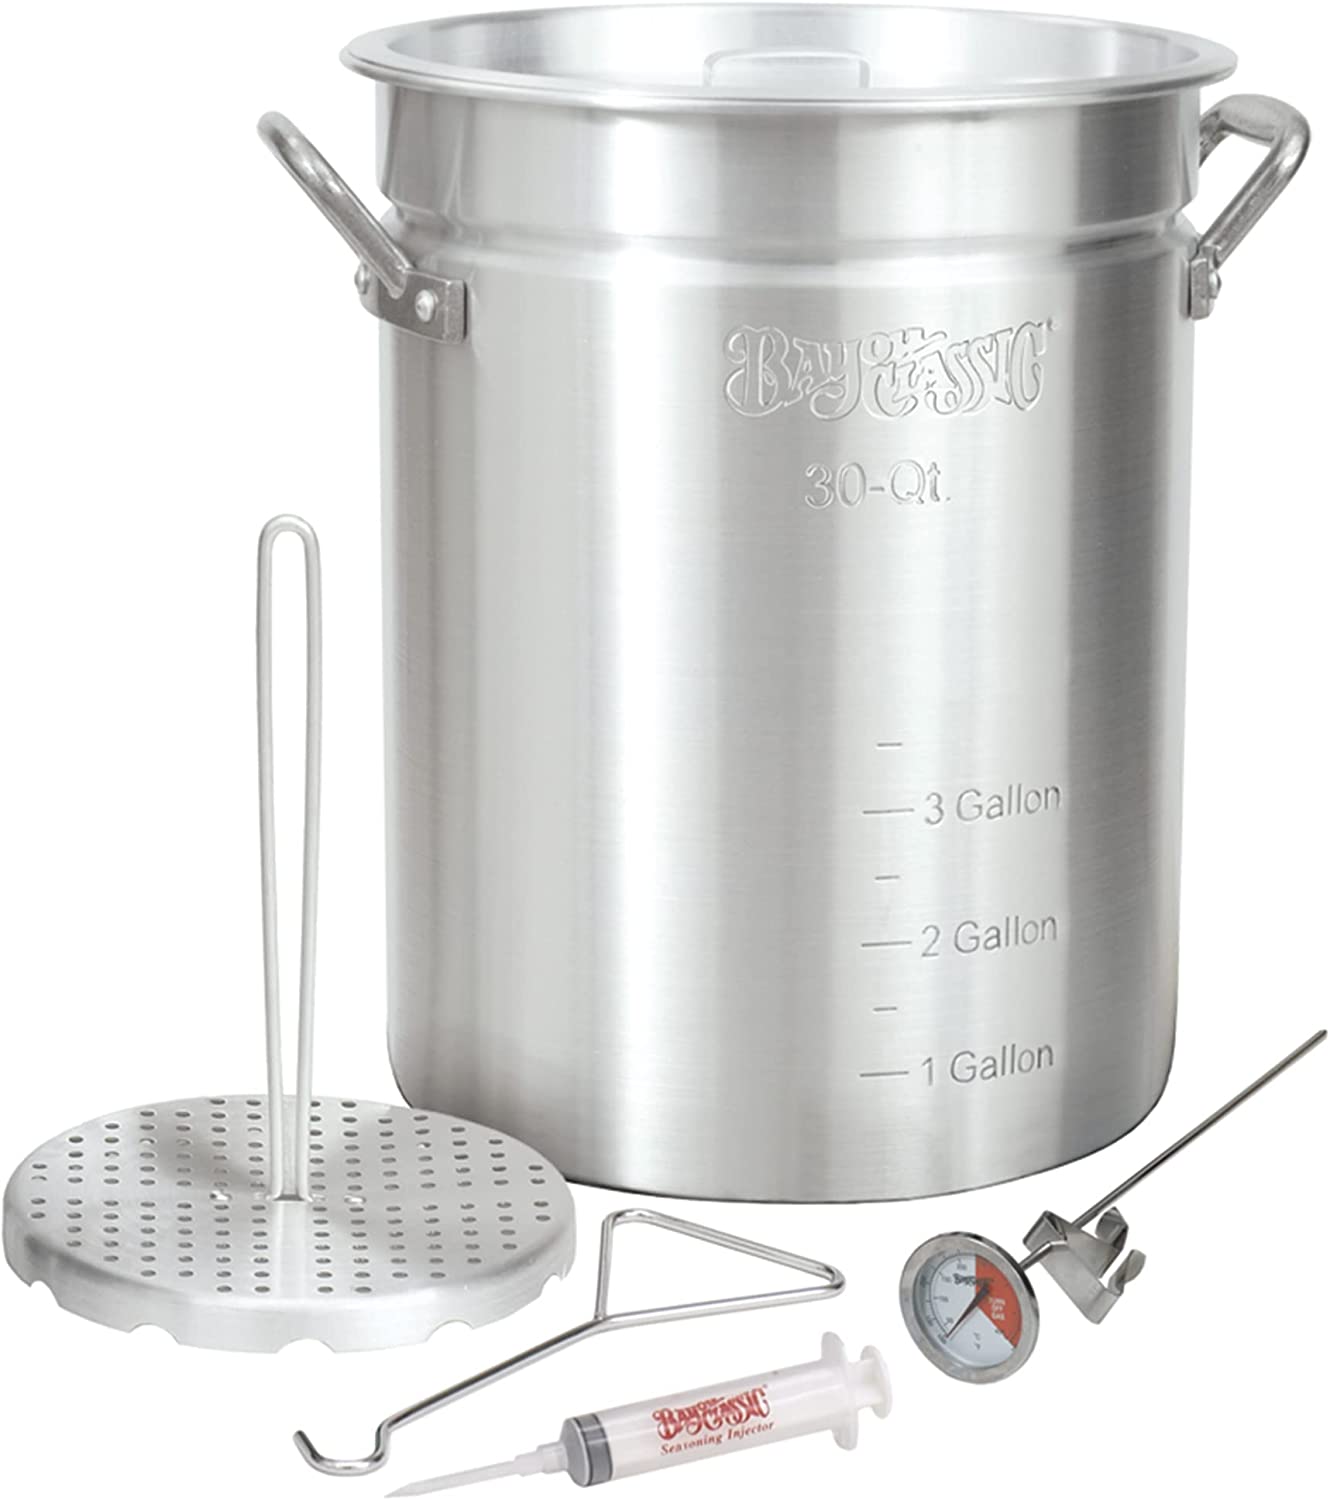 Bayou Classic 3025 30-qt Aluminum Turkey Fryer Set Features 30-qt Aluminum Turkey Fryer Pot Perforated Poultry Rack &amp; Hook 12-in Stainless Thermometer 1-oz Seasoning Injector